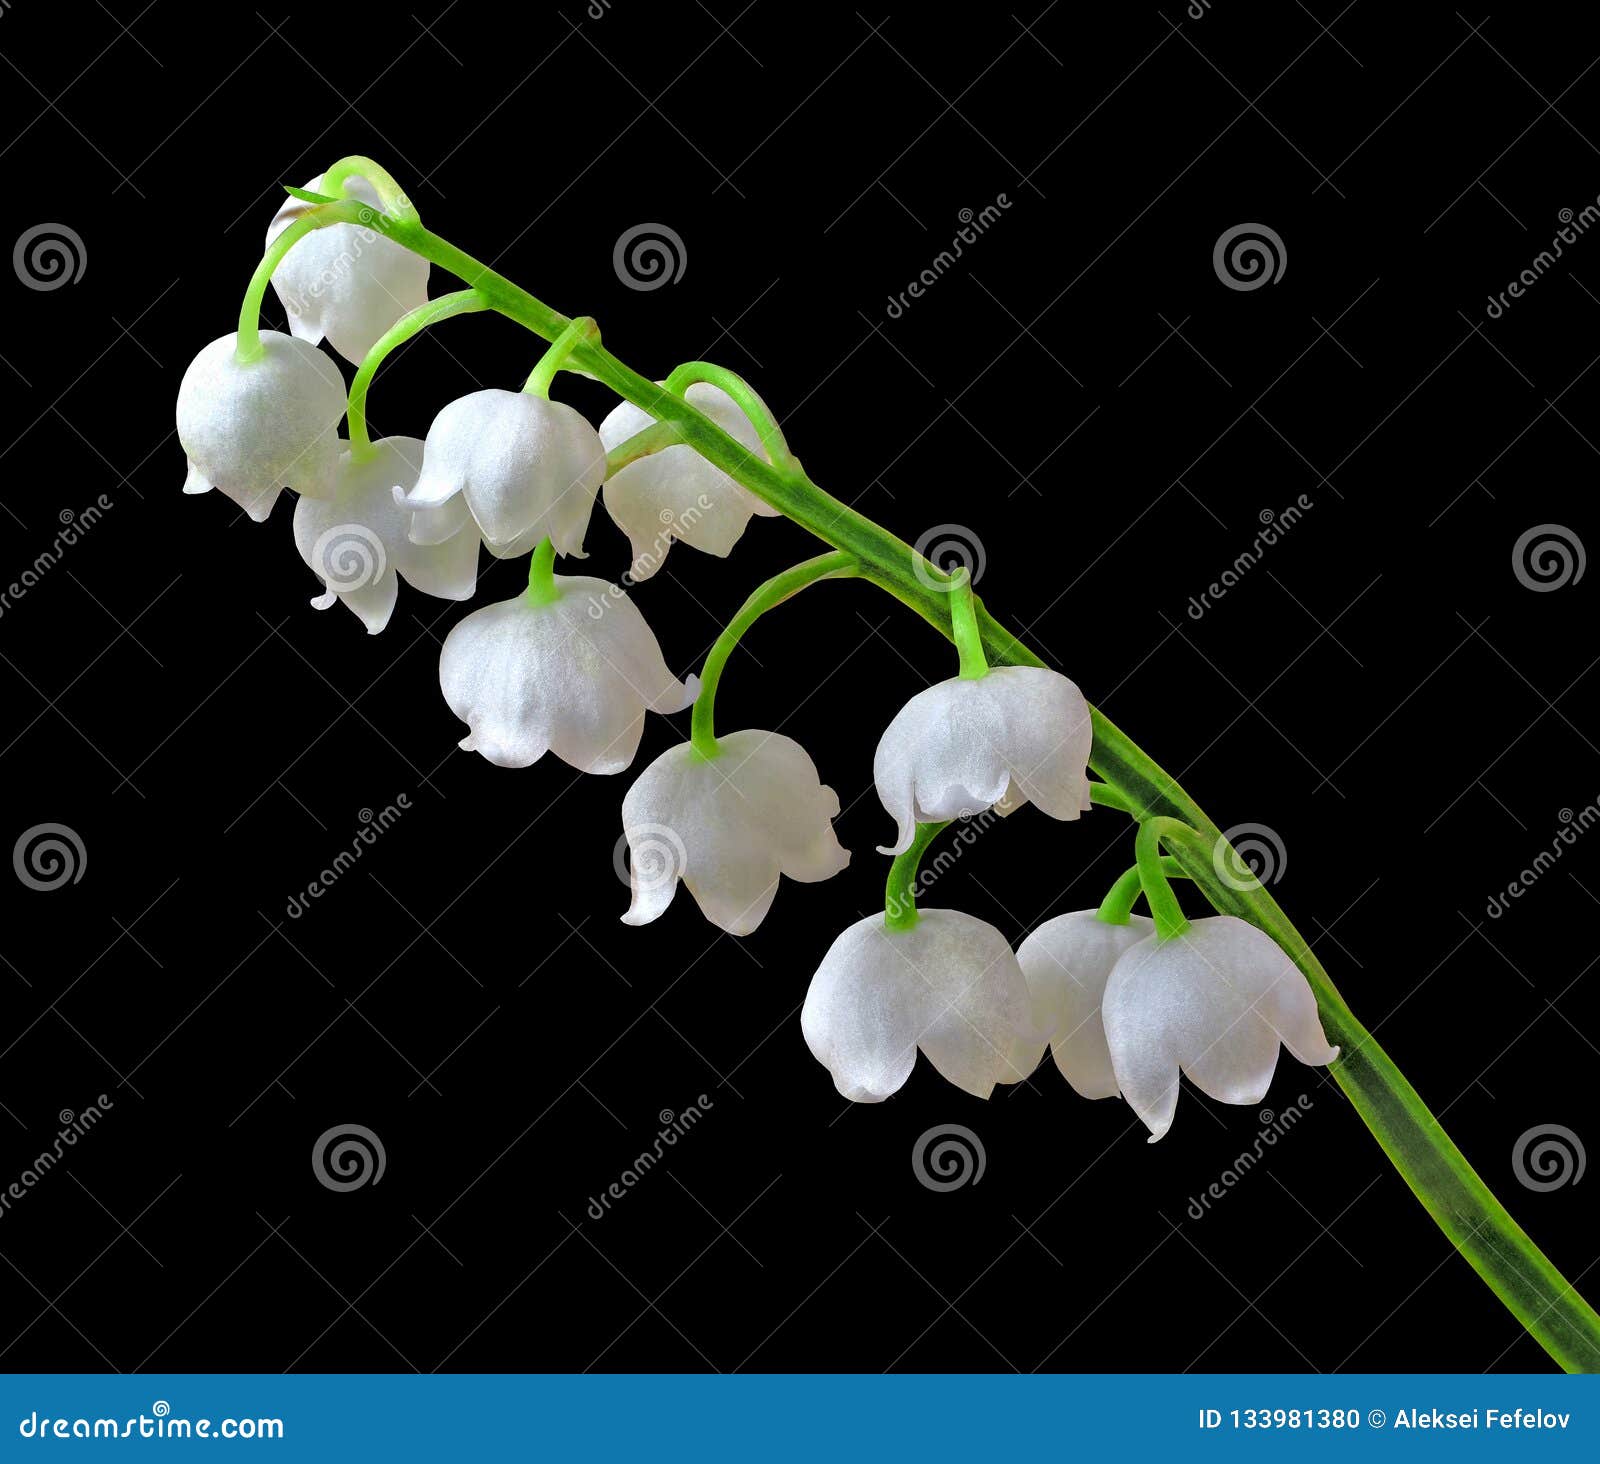 White Lily of the Valley Flower Isolated on a Black Background. Close ...